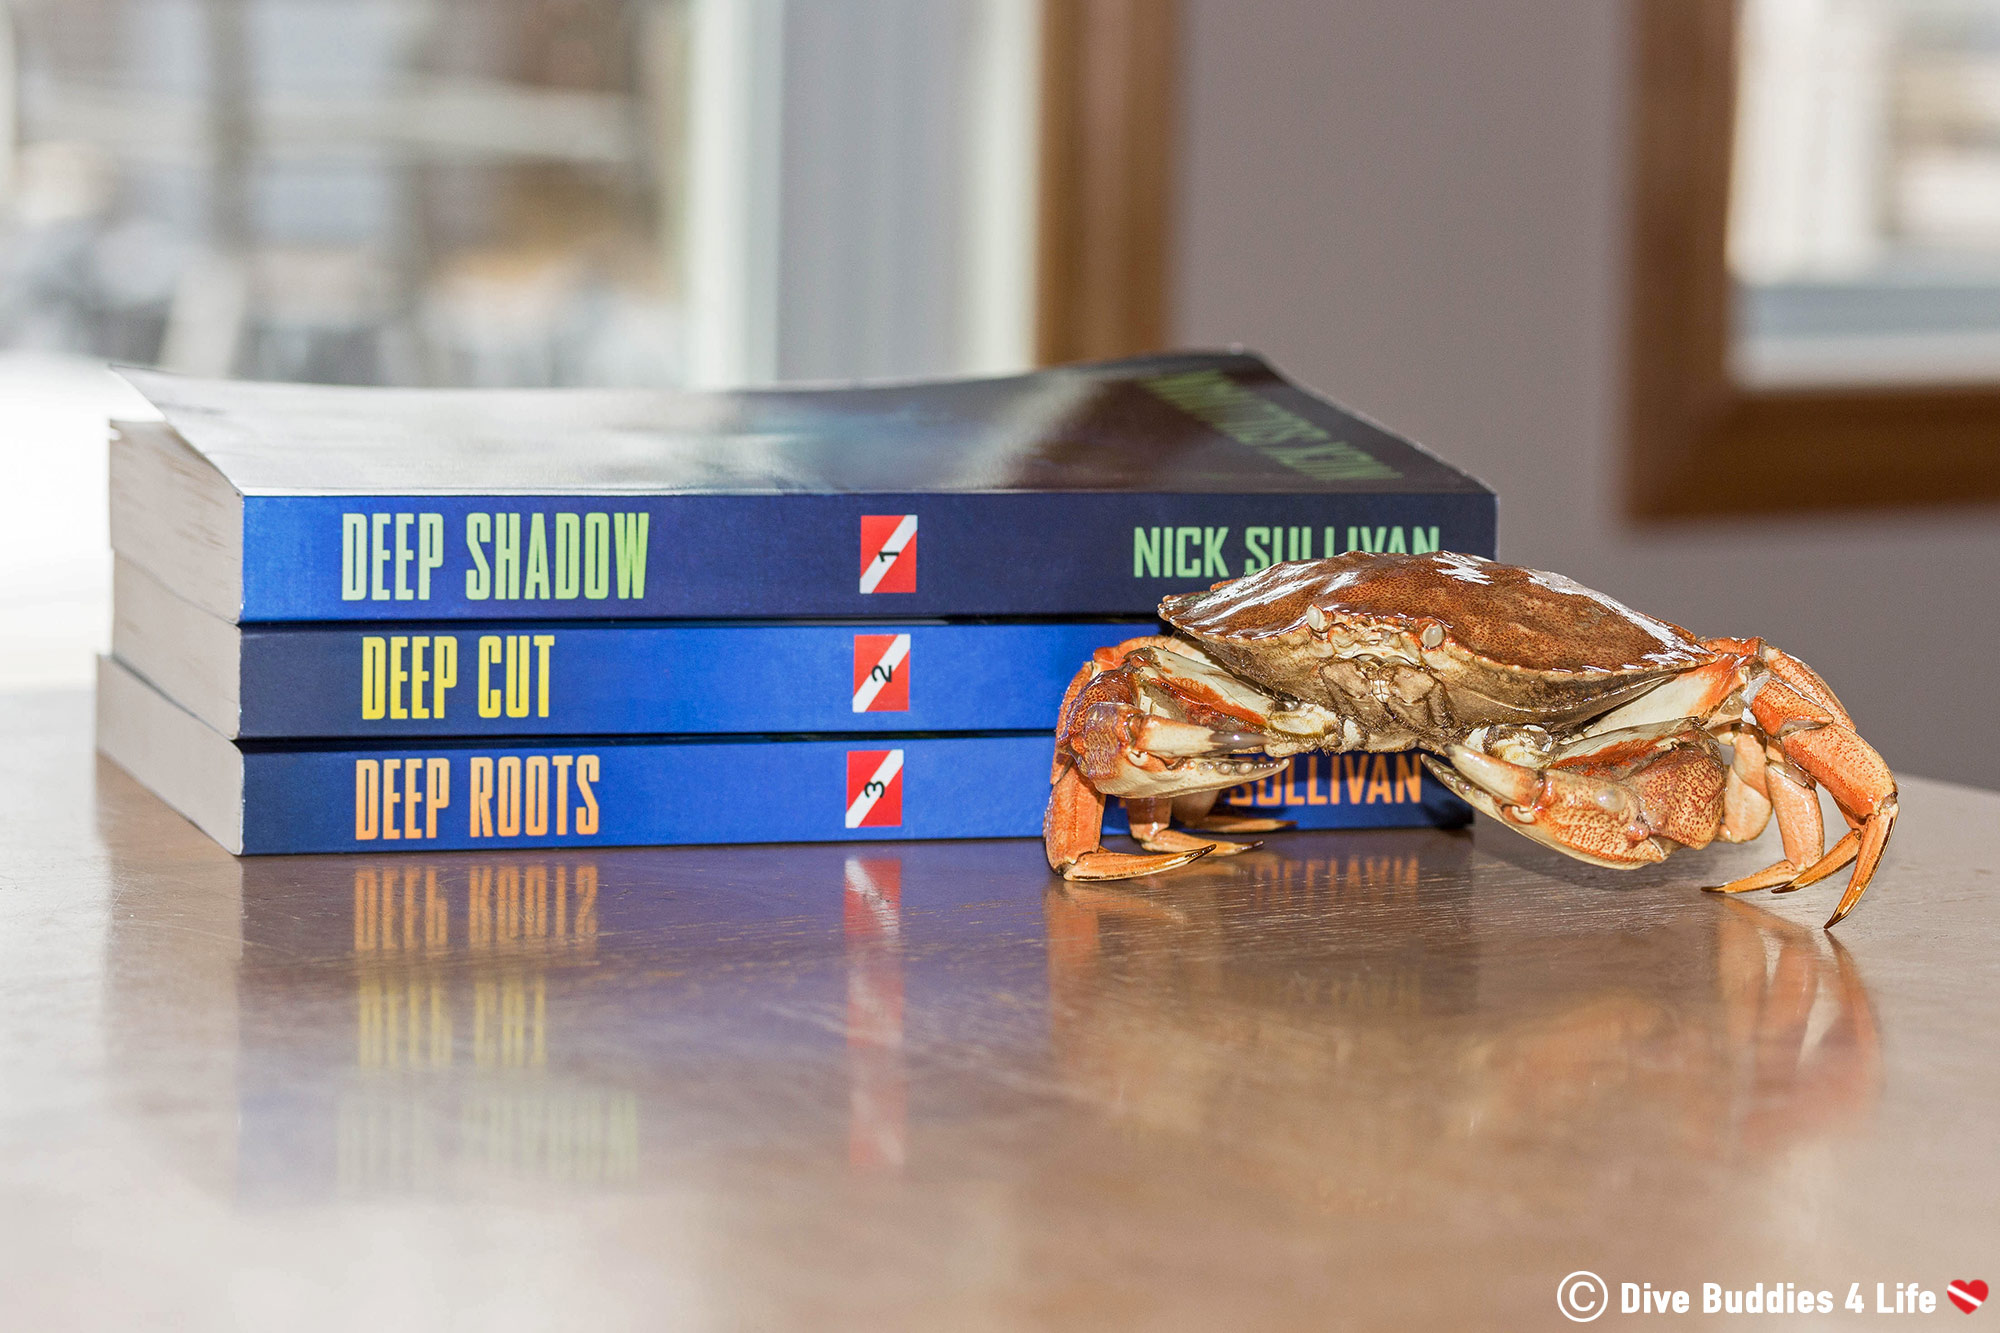 The Deep Series Scuba Diving Books And A Crab Displayed On A Table